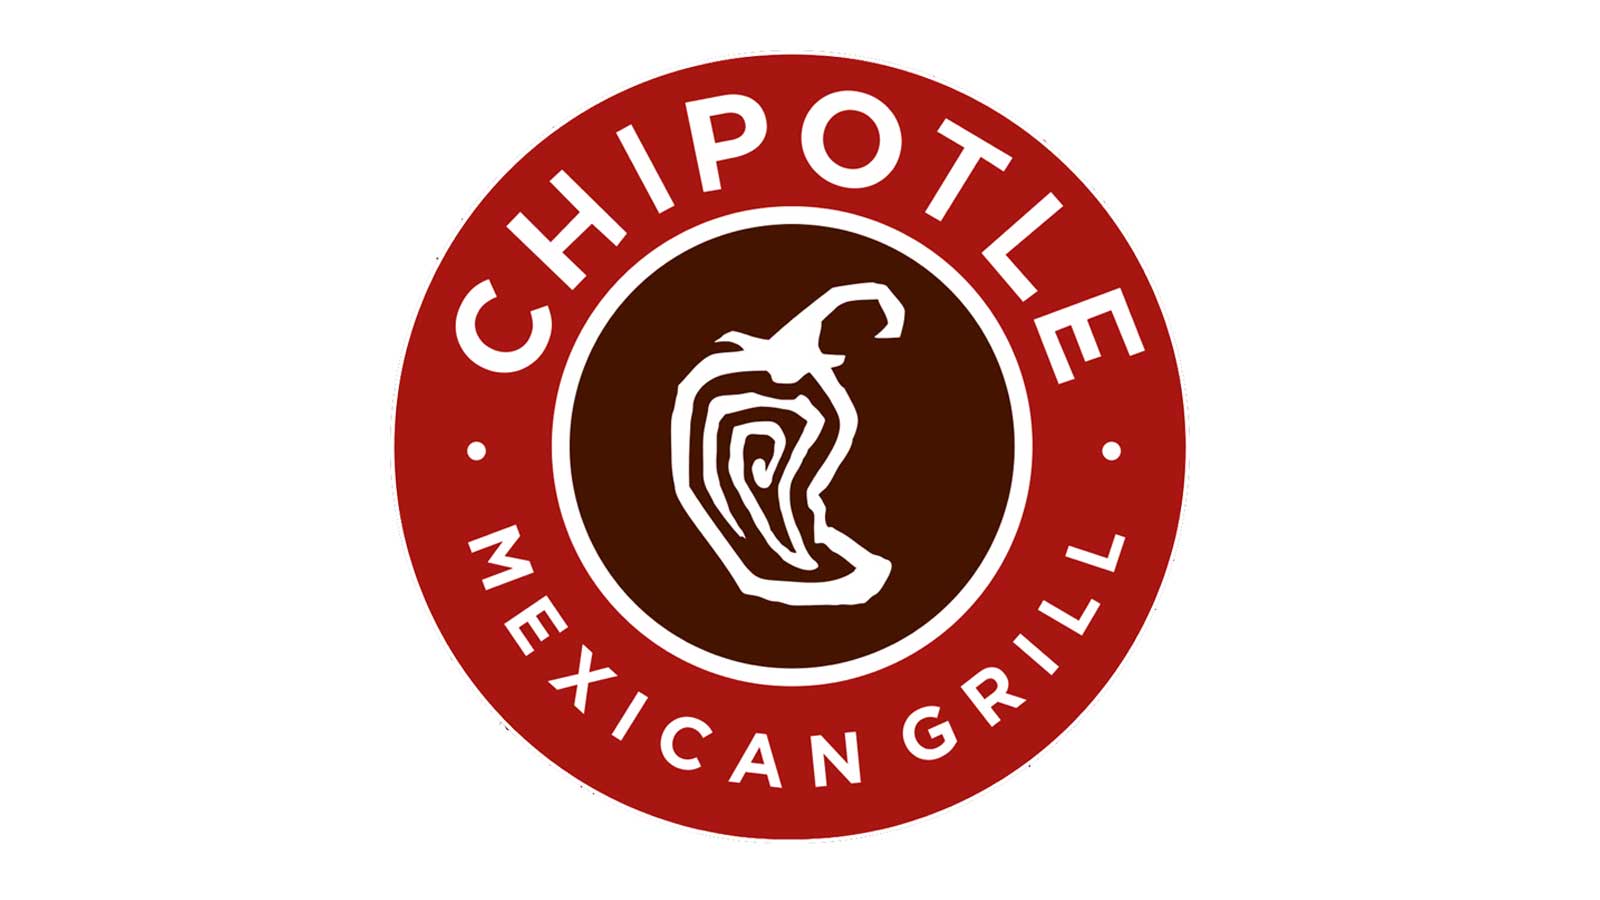 Working at Chipotle | Careers at Chipotle